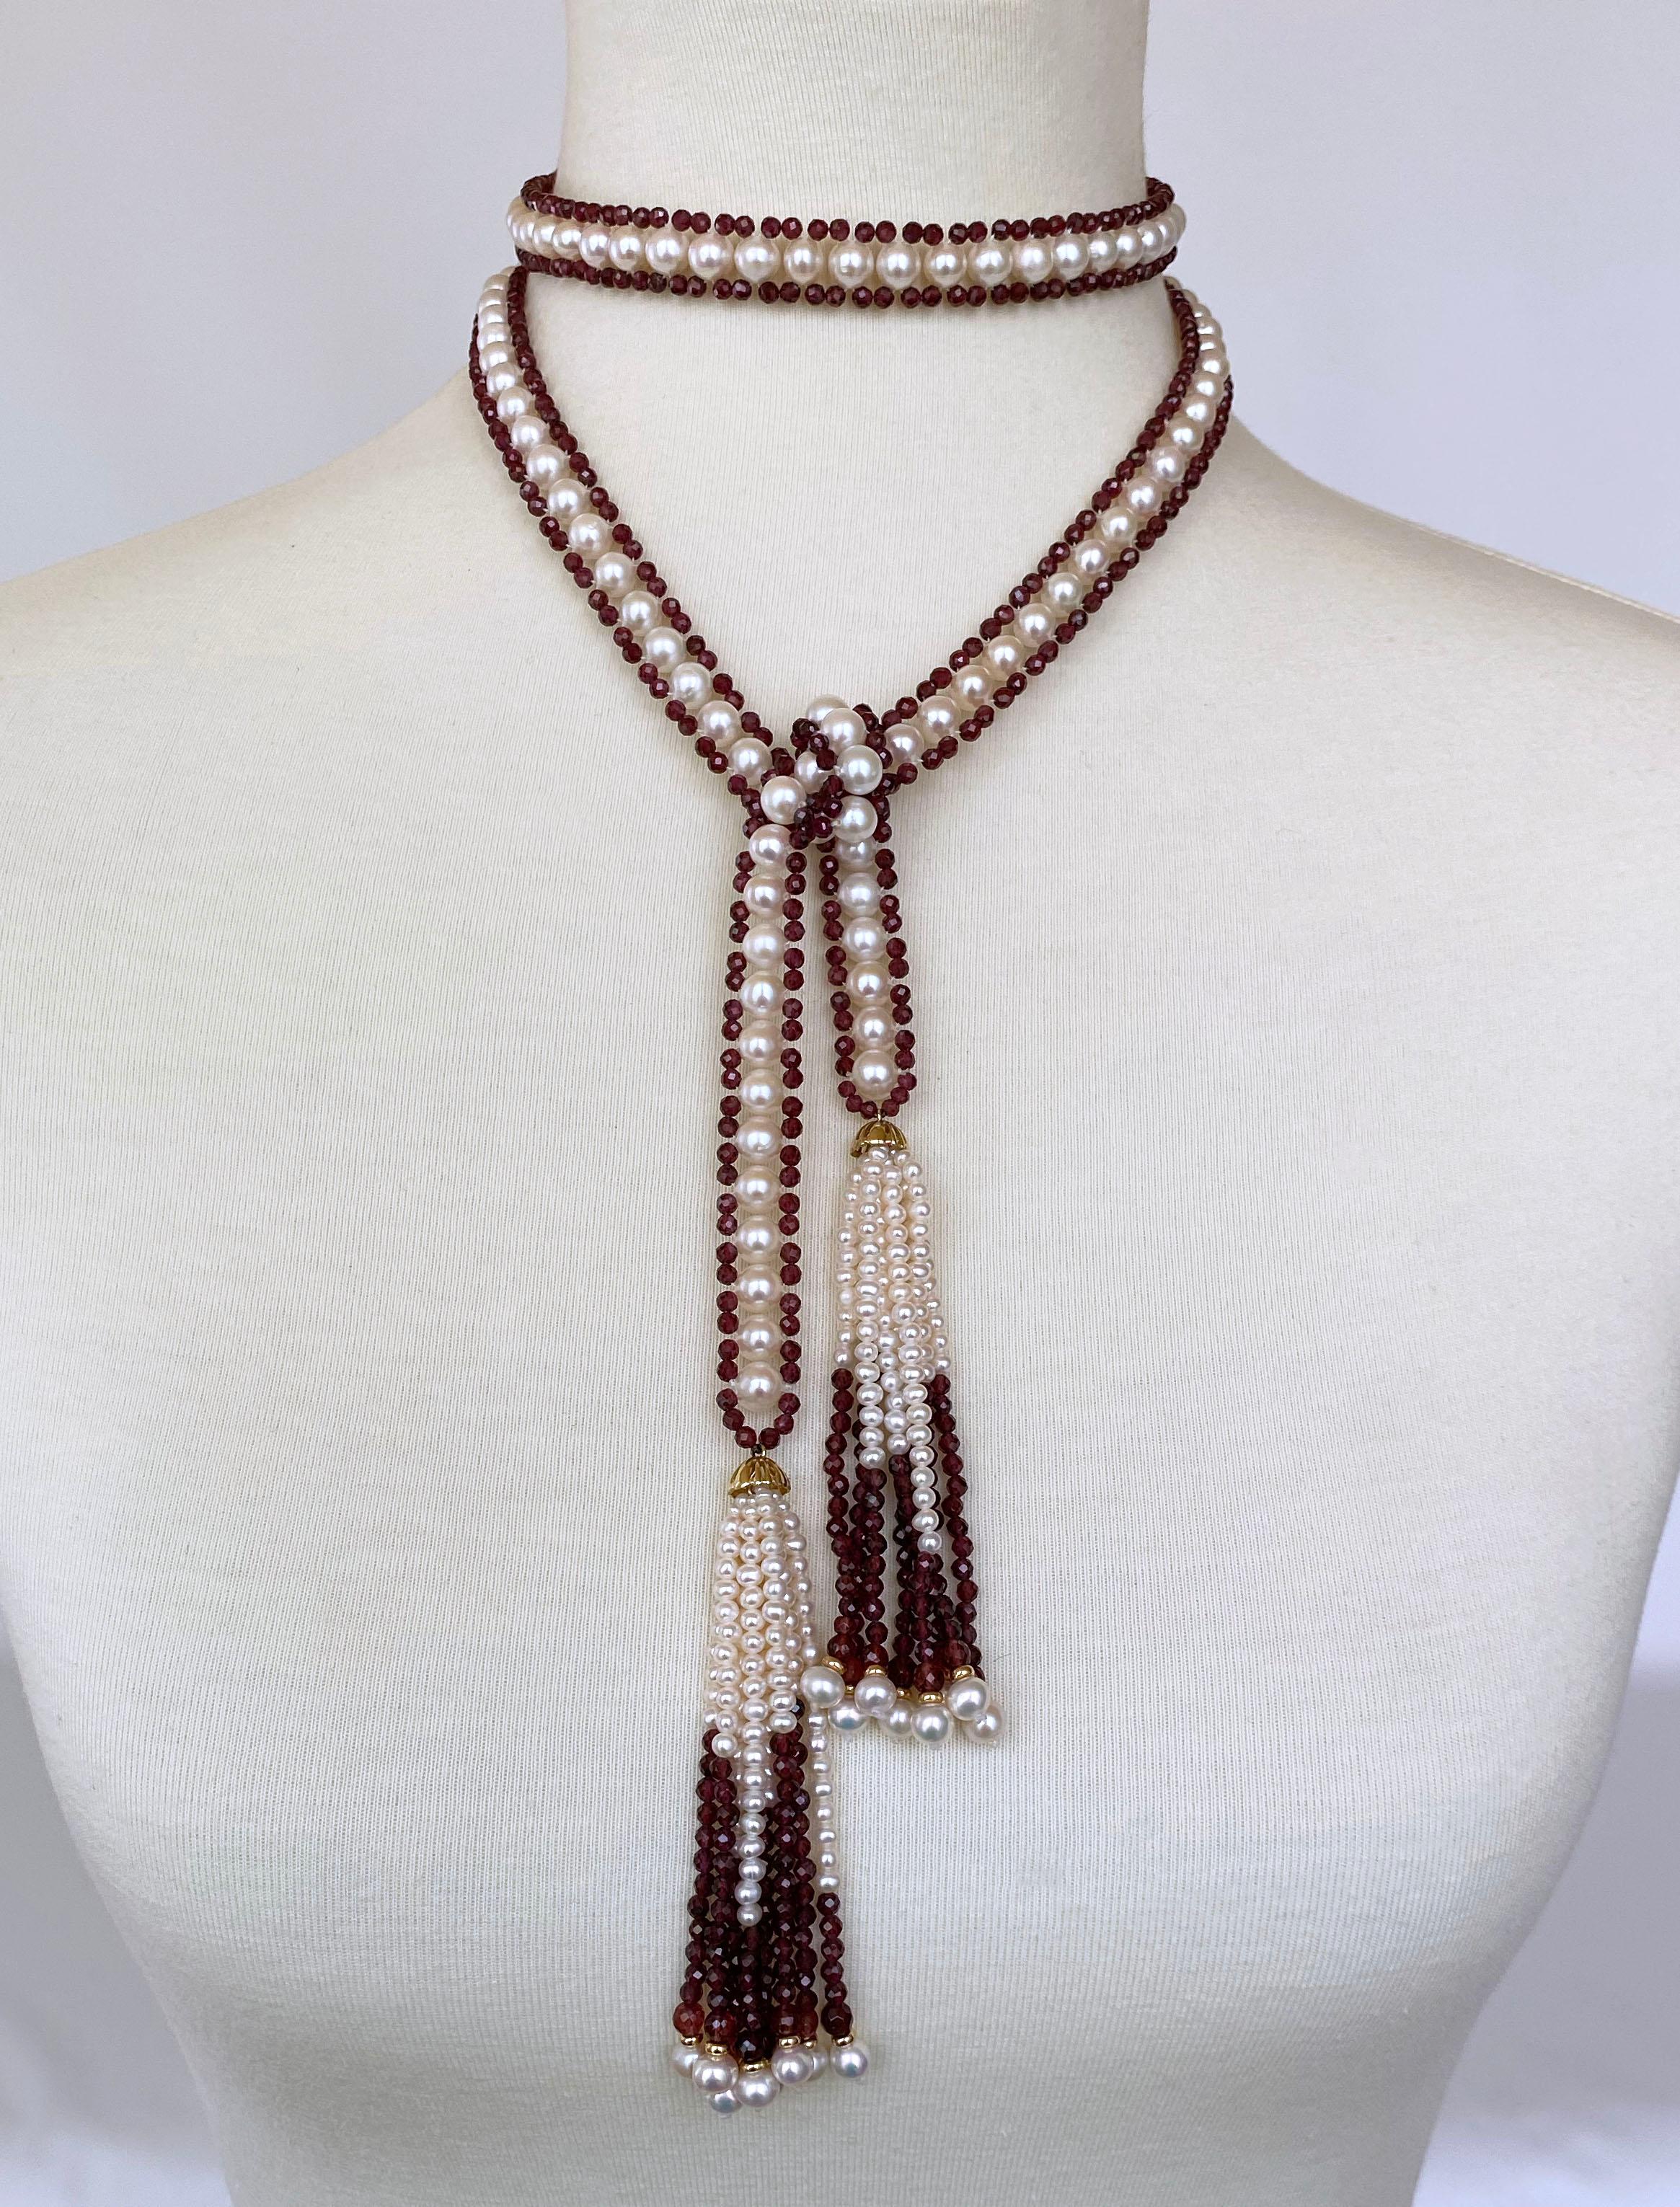 Iconic Marina J. Woven Sautoir. This timeless Art Deco Inspired piece includes beautiful and high luster White Pearls, individually picked and woven together with perfectly faceted high shine Garnet beads. The Garnet displays a beautiful deep